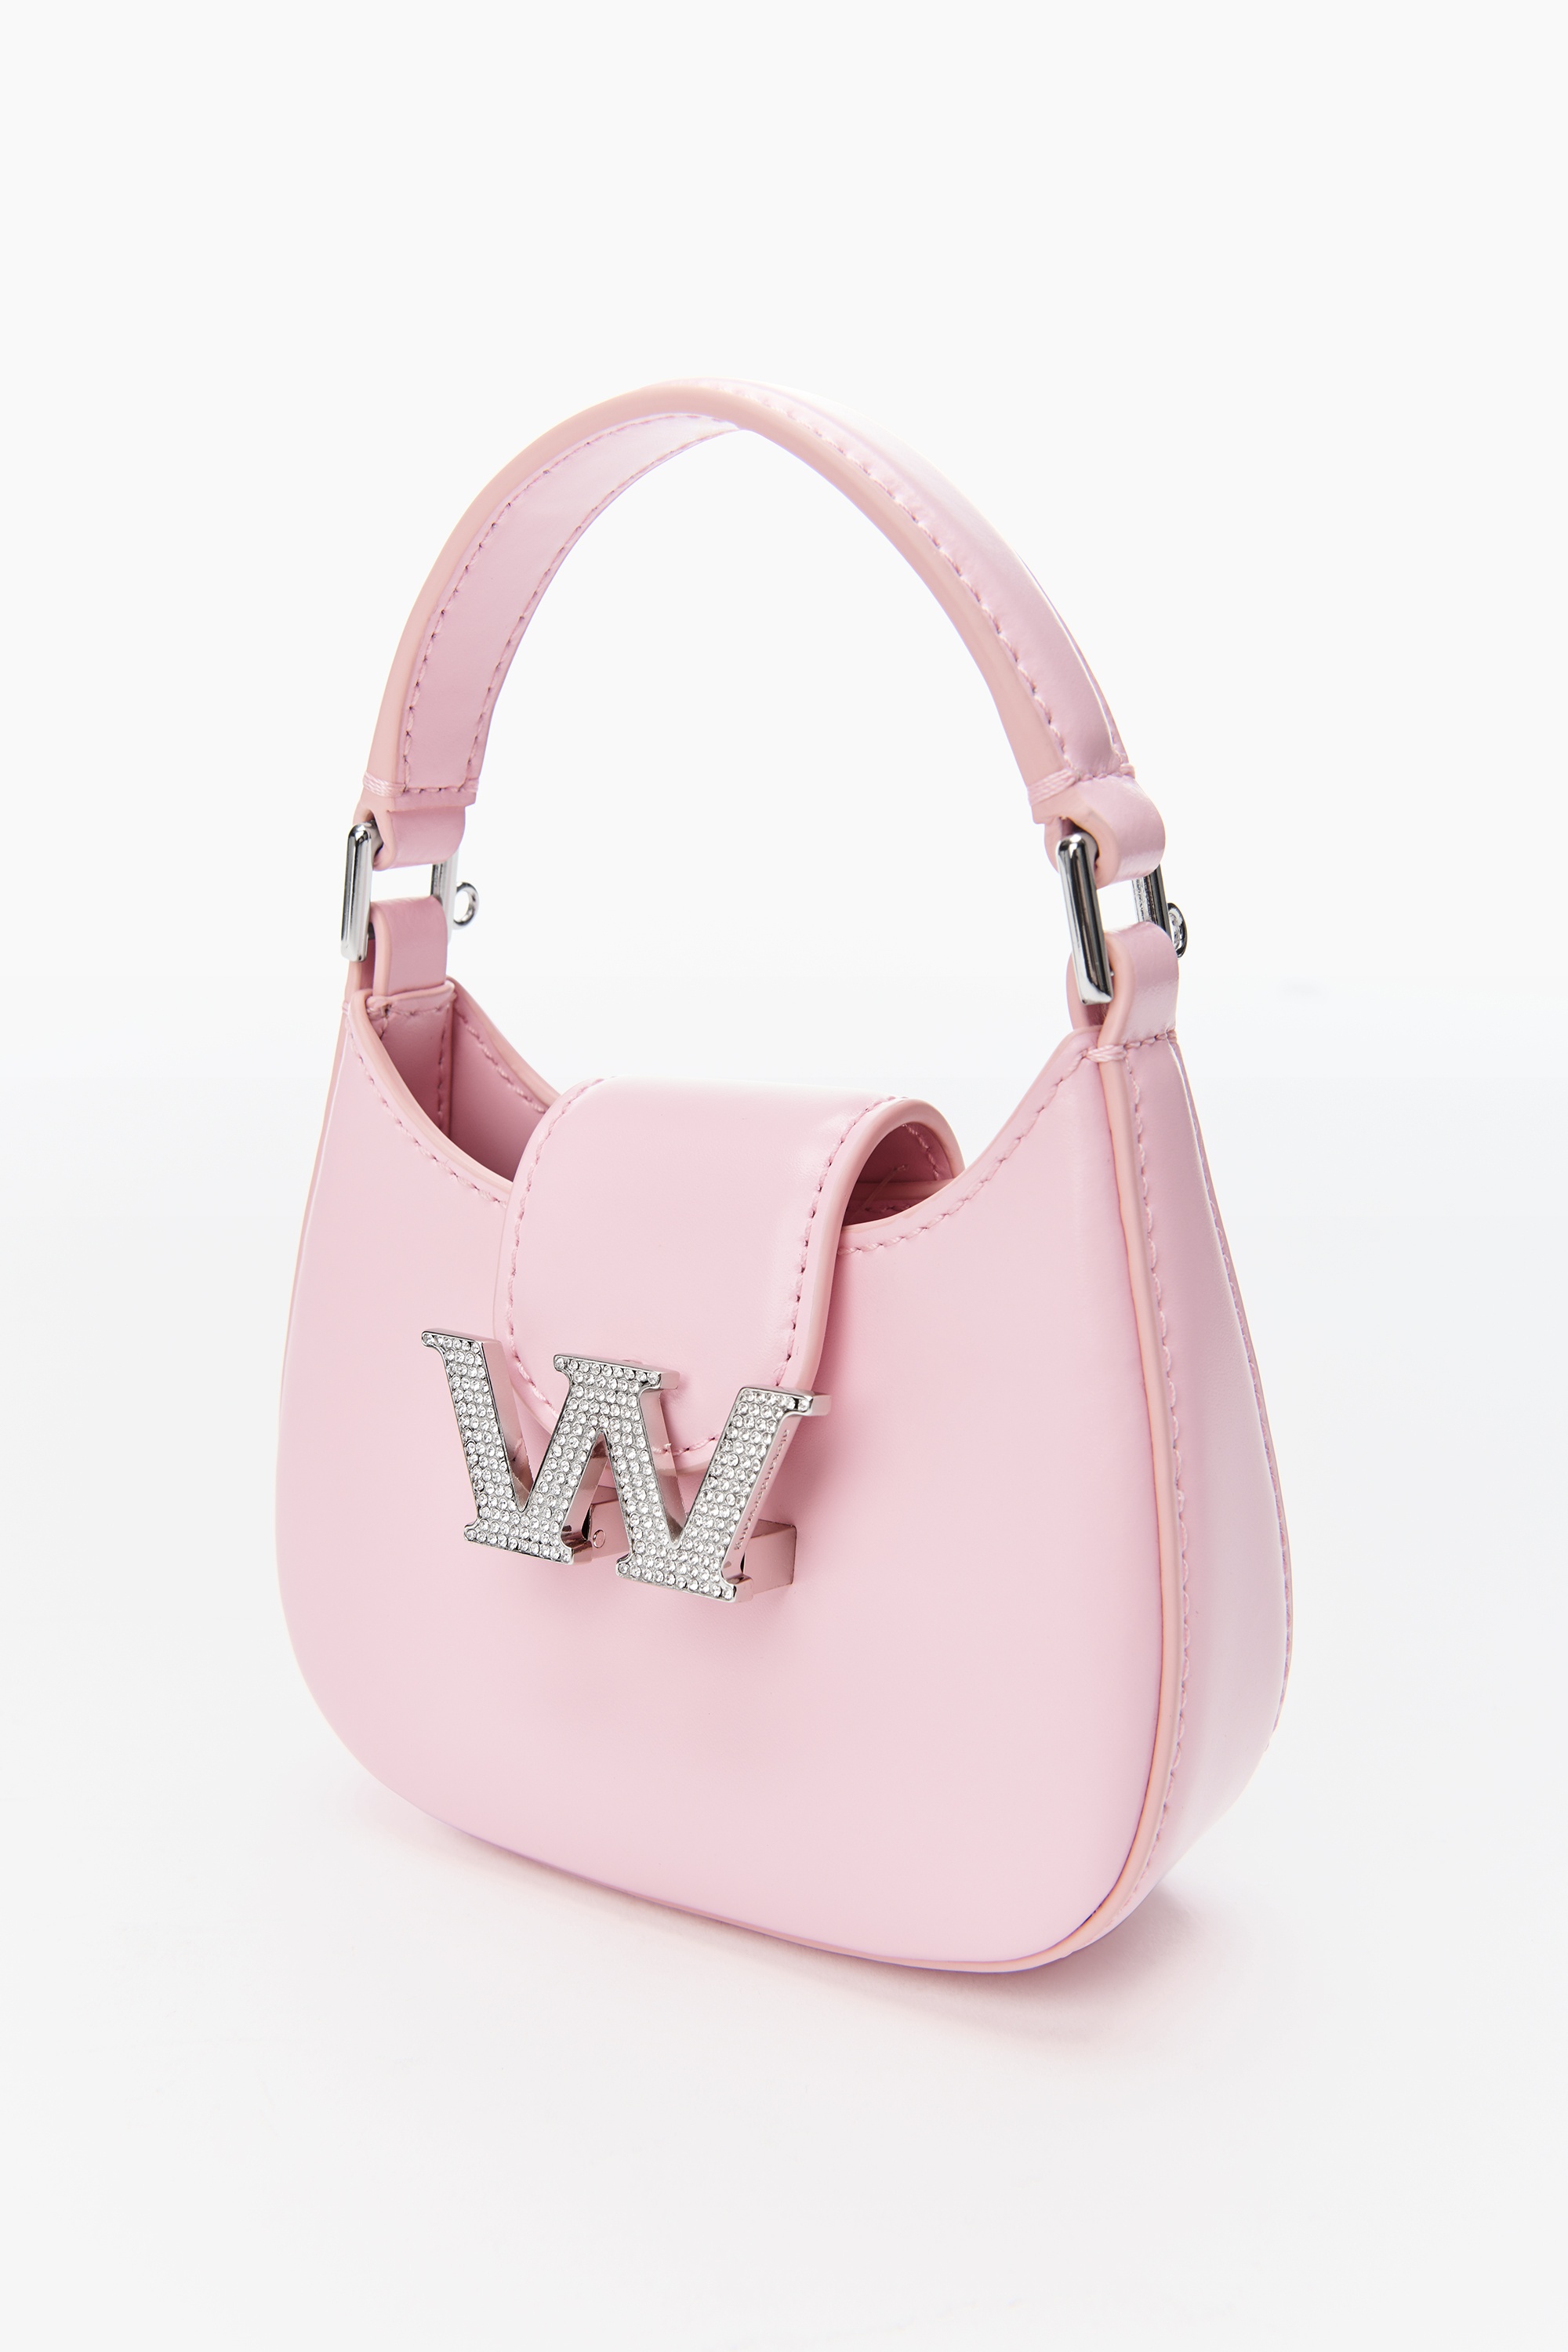 W LEGACY MICRO HOBO IN LEATHER - 2